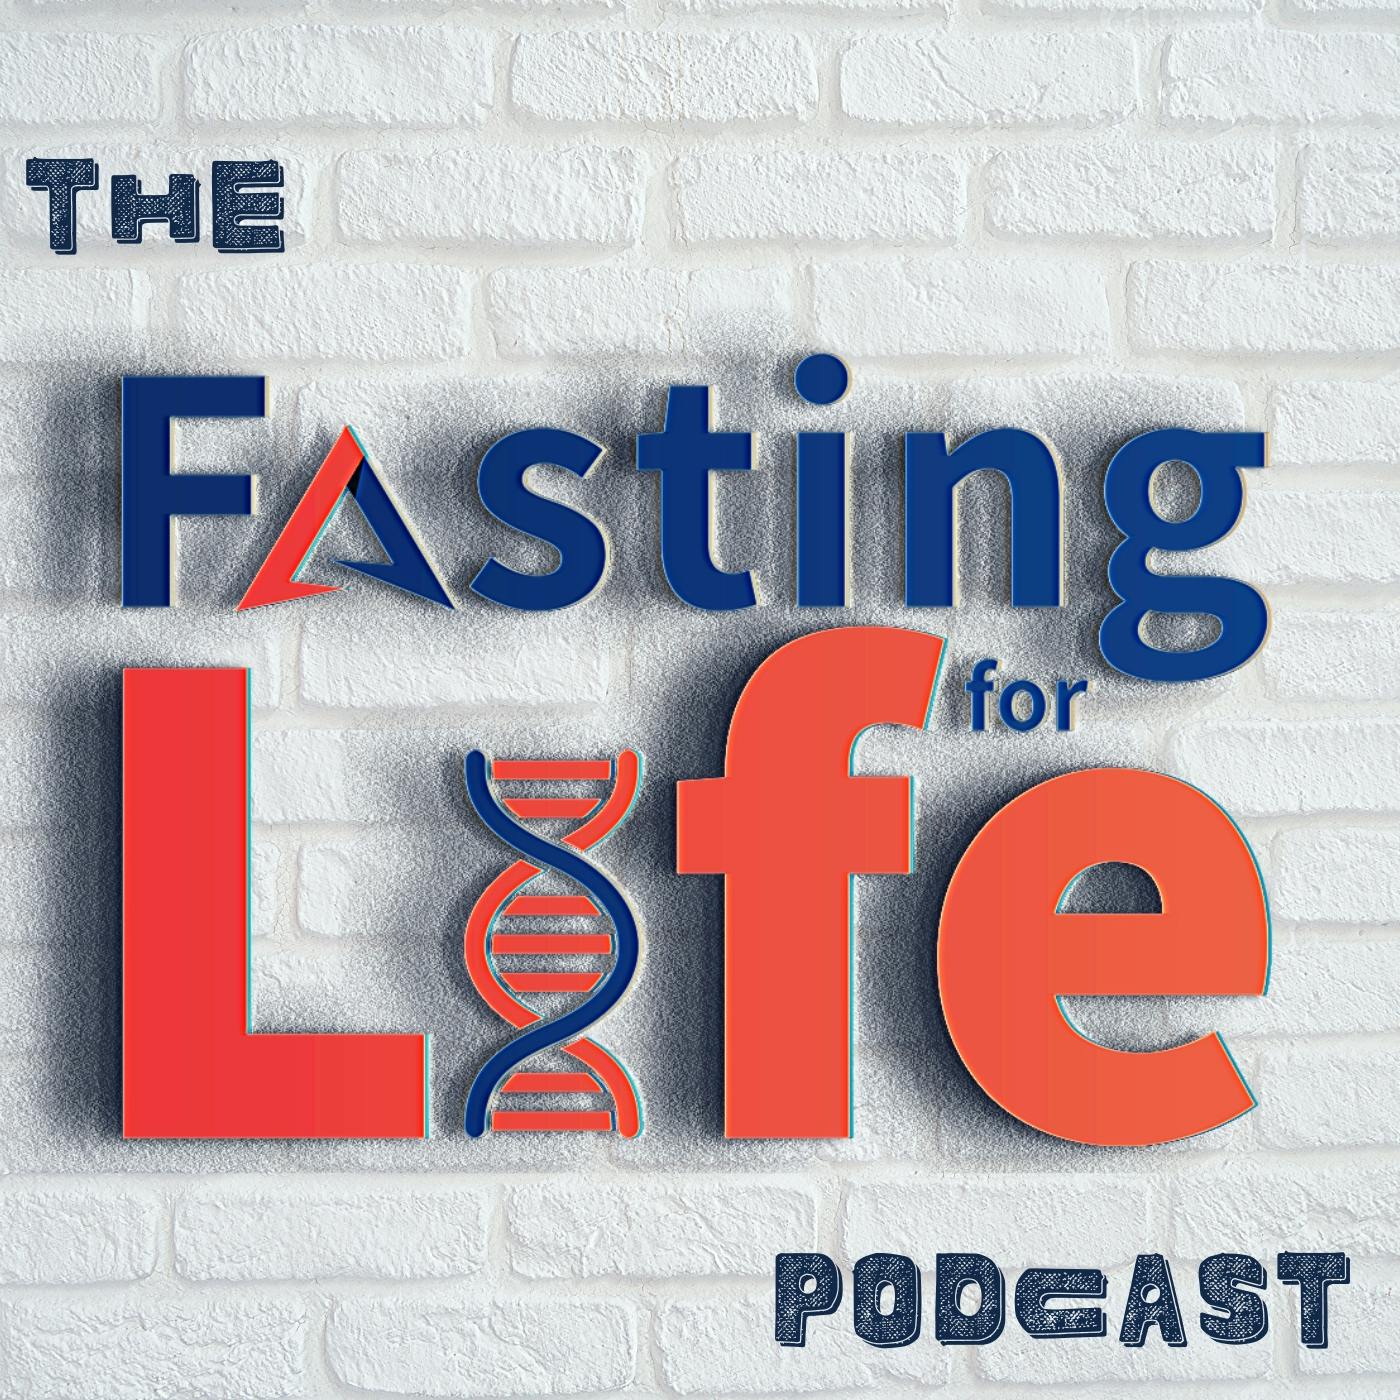 Ep. 132 - Intermittent Energy Restriction Ameliorates Adipose Tissue-associated Inflammation in Adults with Obesity | Benefits of Fasting When Compared to a Low Calorie Type Diet or Caloric Restrictio